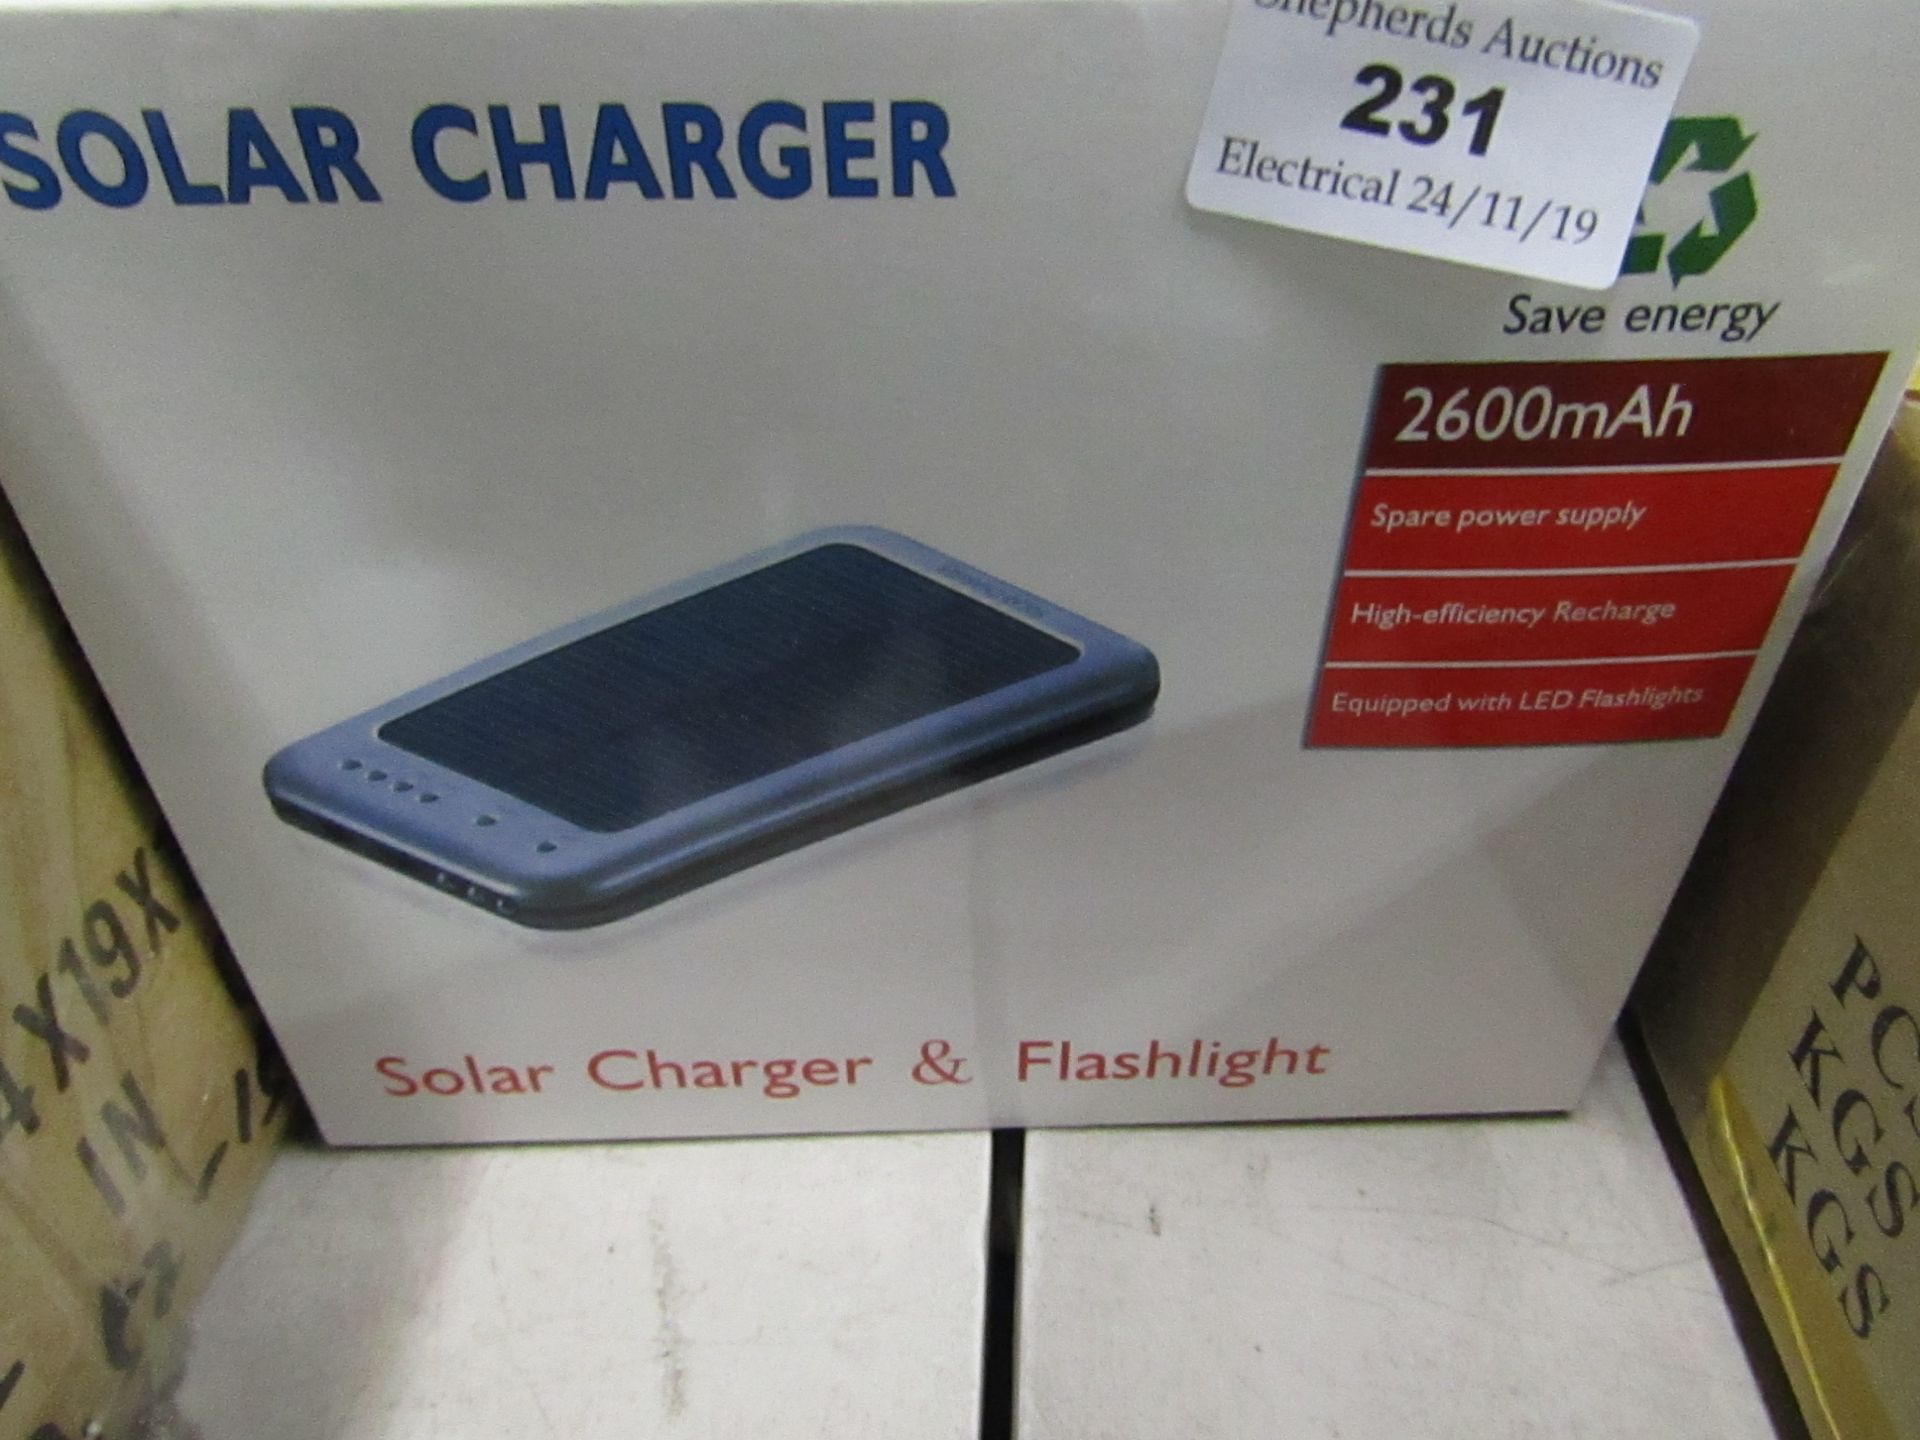 Solar charger & flashlight 2600mAh, untested and boxed.